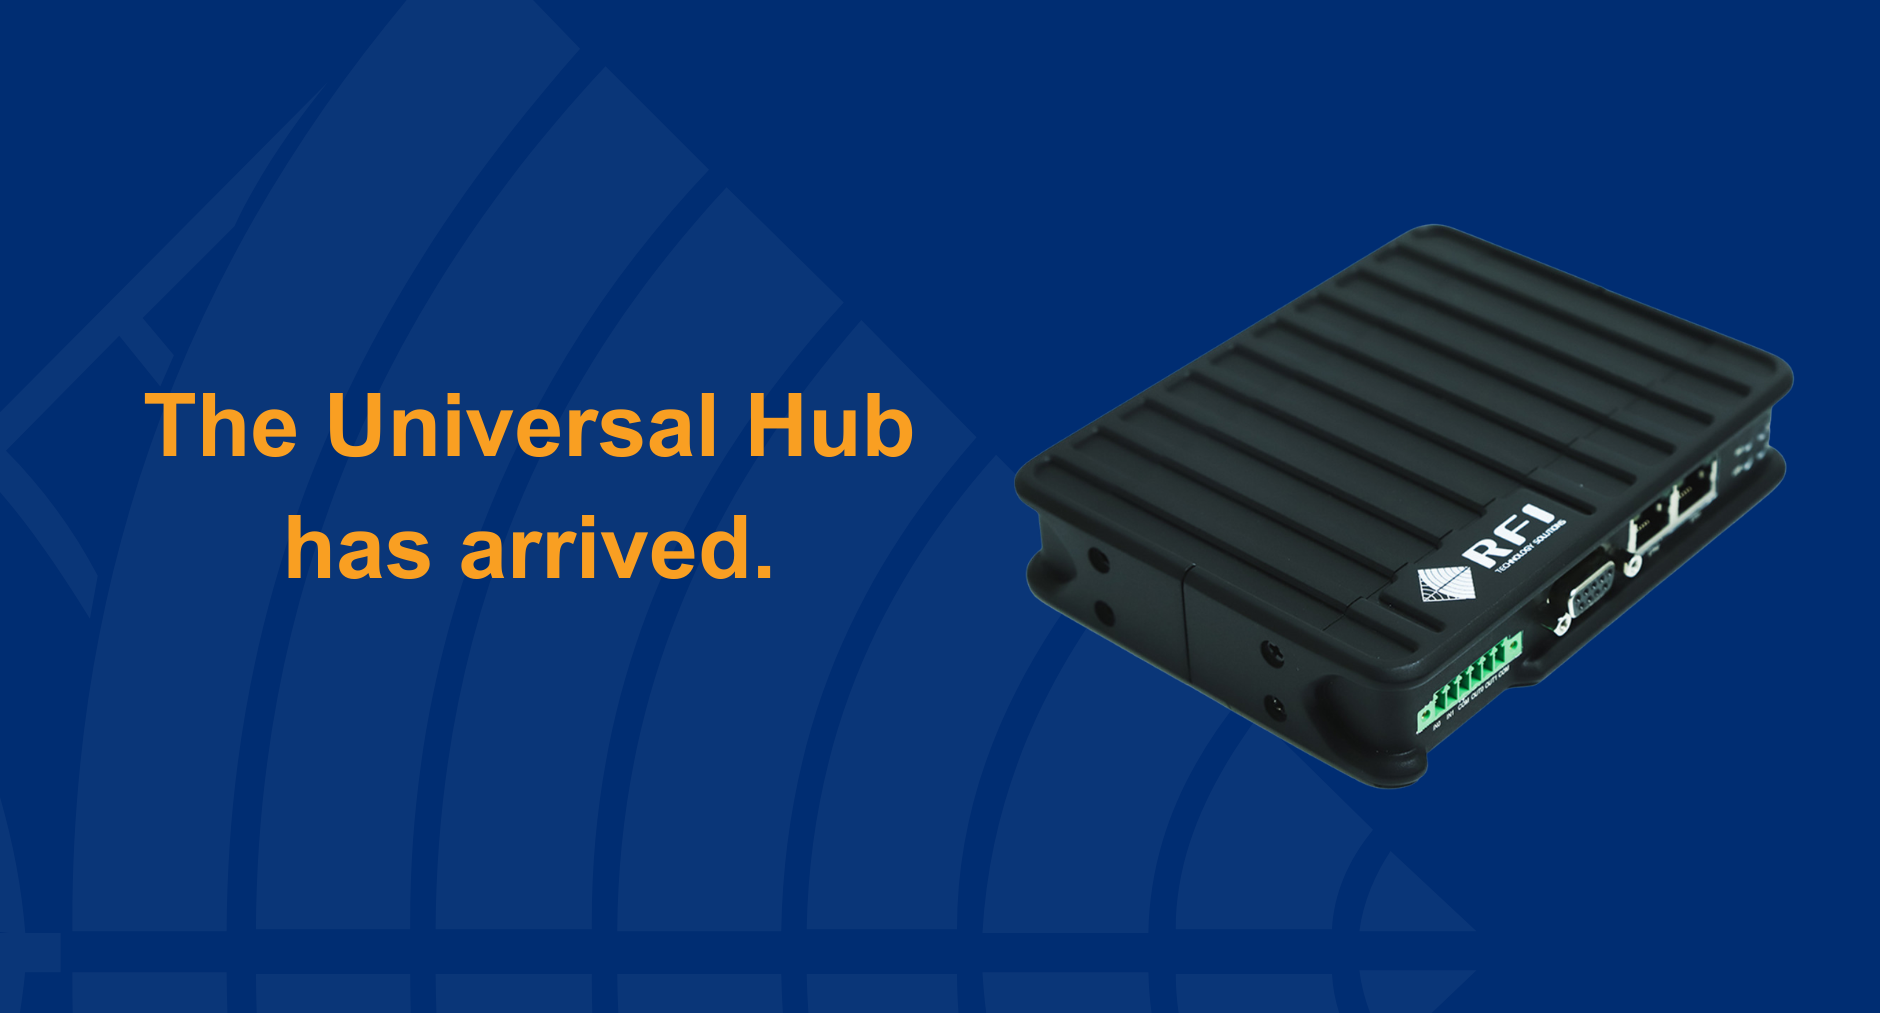 The Universal Hub has arrived